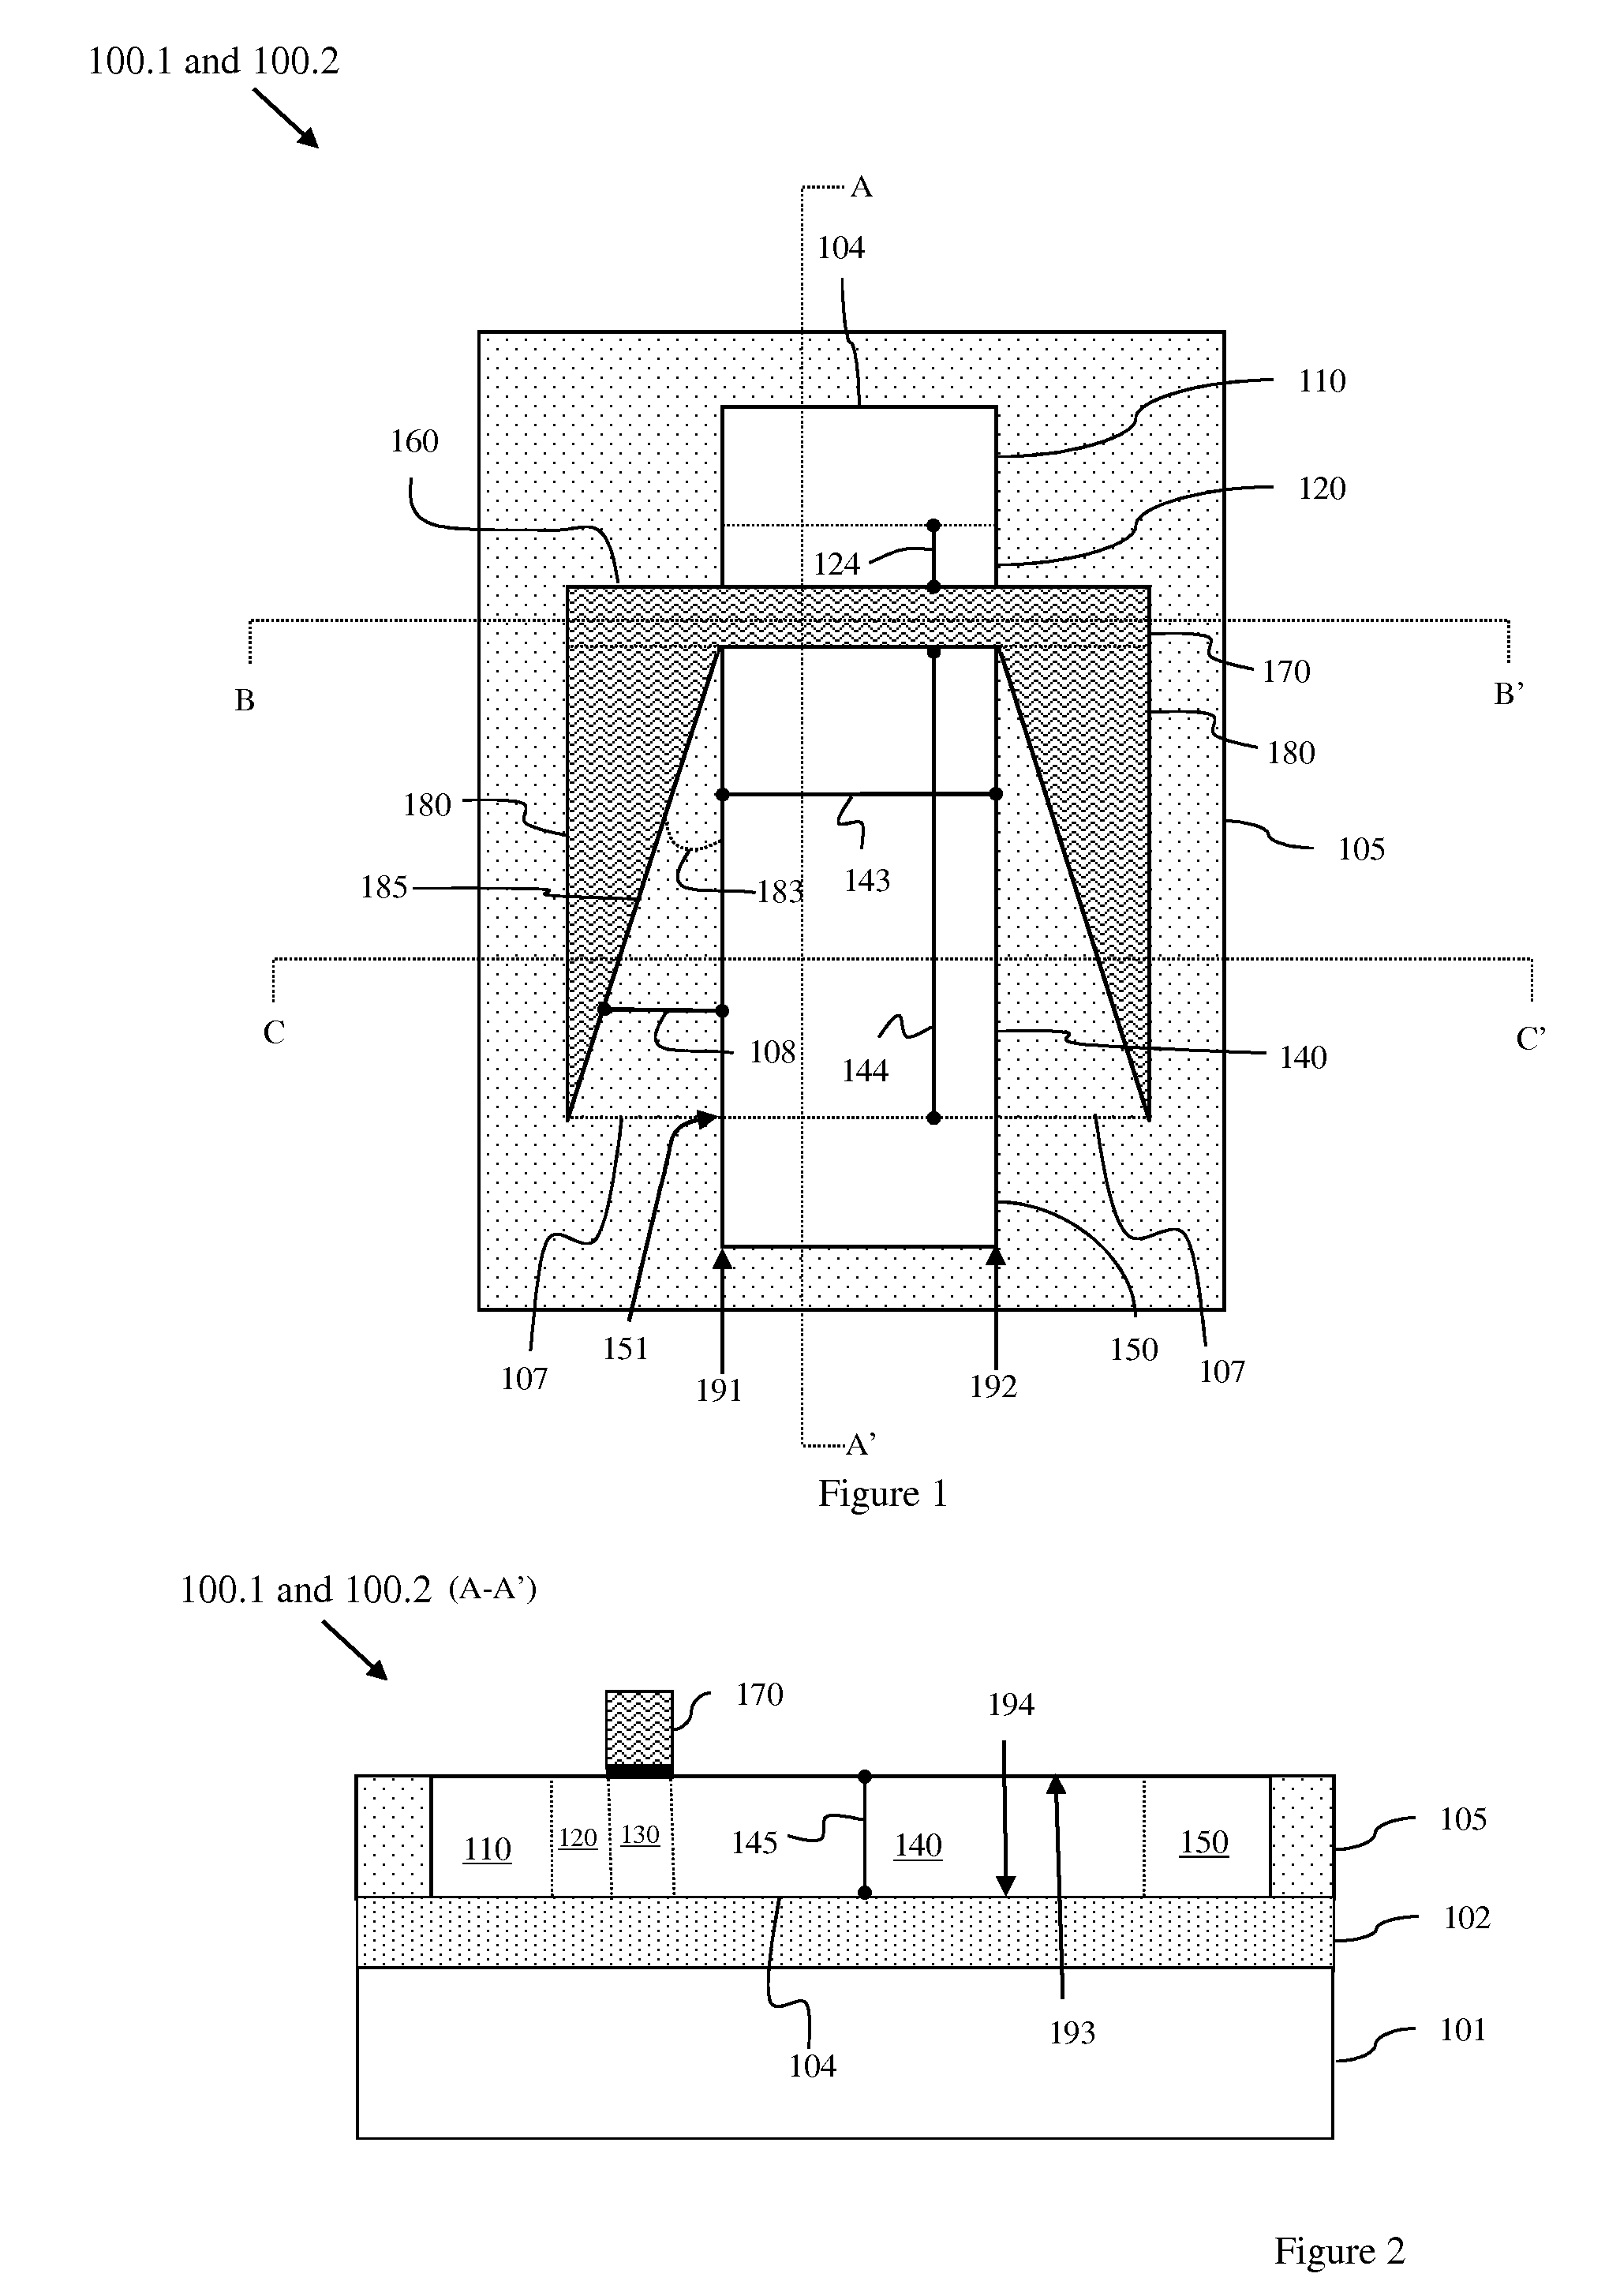 Lateral extended drain metal oxide semiconductor field effect transistor (LEDMOSFET) with tapered dielectric plates